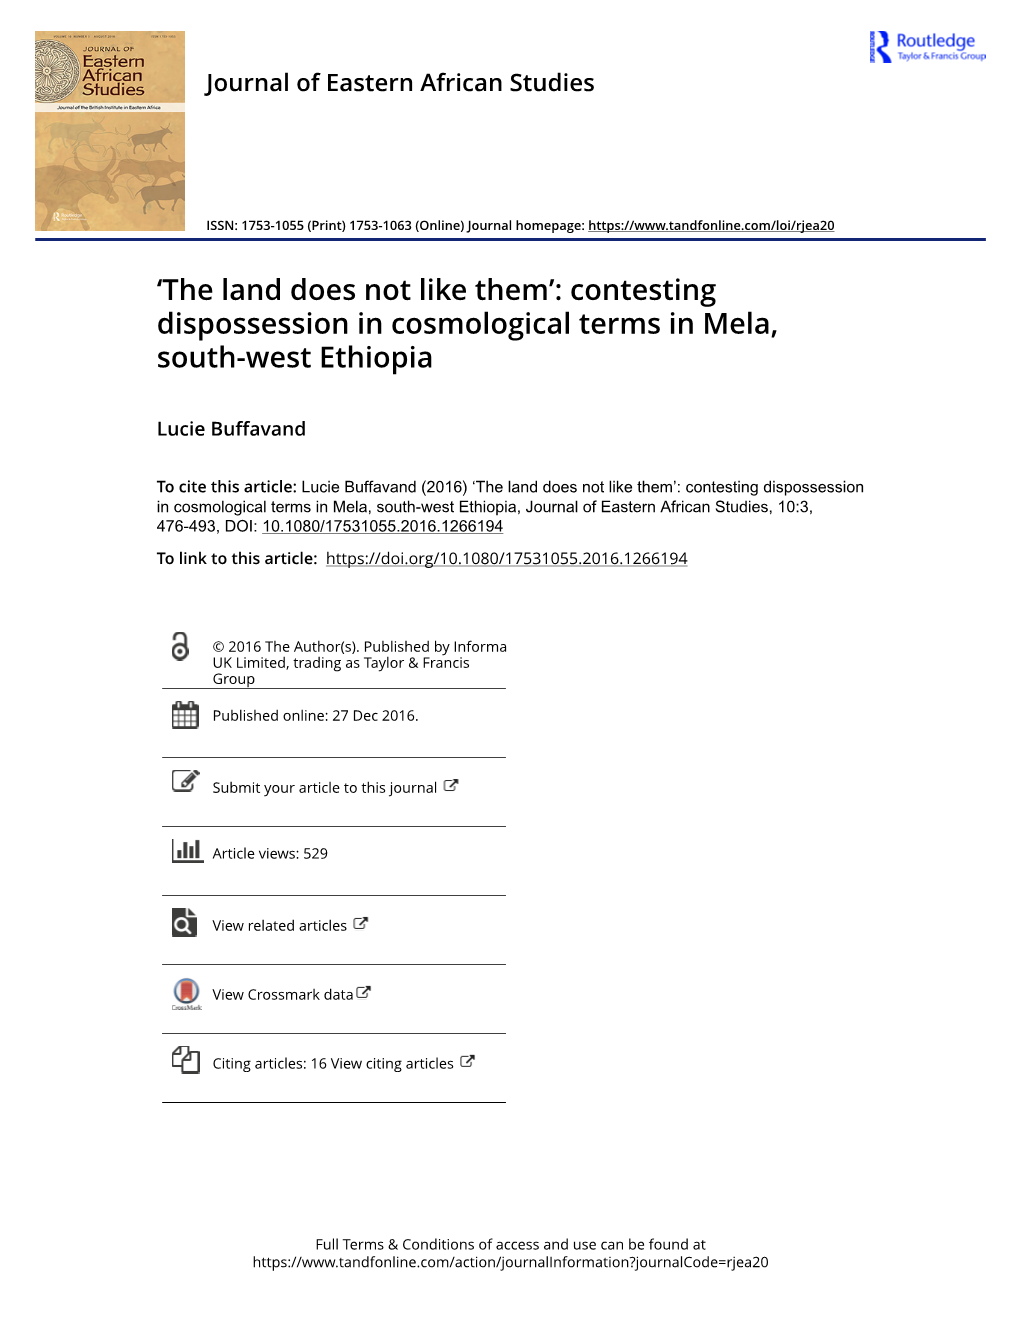 Contesting Dispossession in Cosmological Terms in Mela, South-West Ethiopia